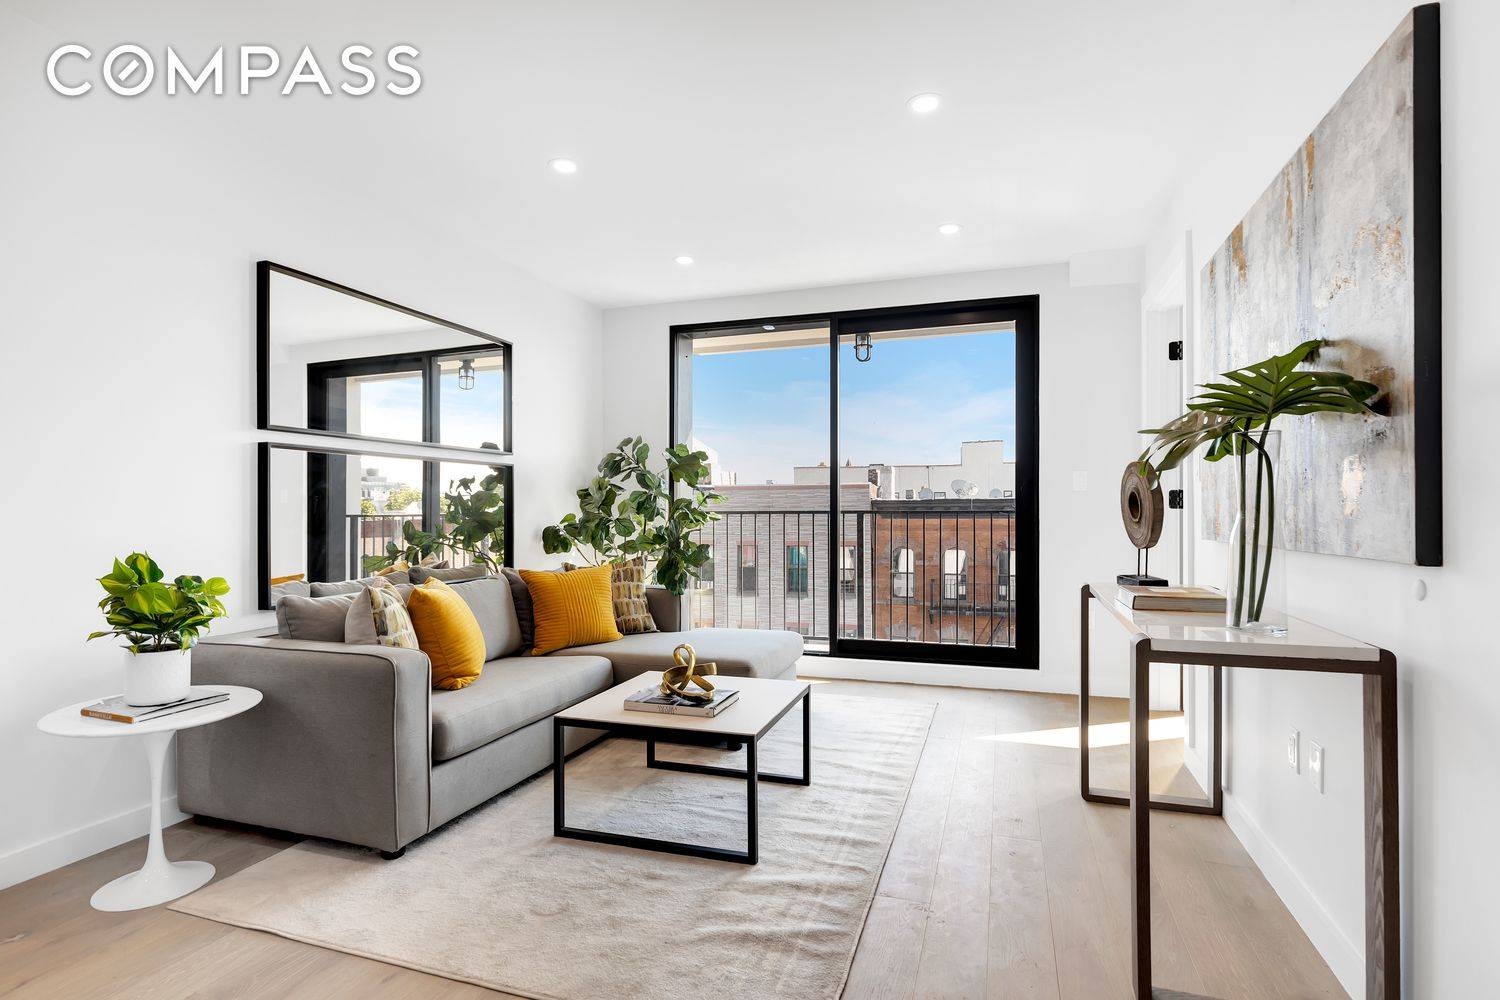 Brand New Condominium in Bushwick Expansive 1 amp ; 2 Bedroom Residences with Open Floor Plans, In Unit Washer and Dryer, Many Apartments with Private Outdoor Space, Stunning Stainless Steel ...